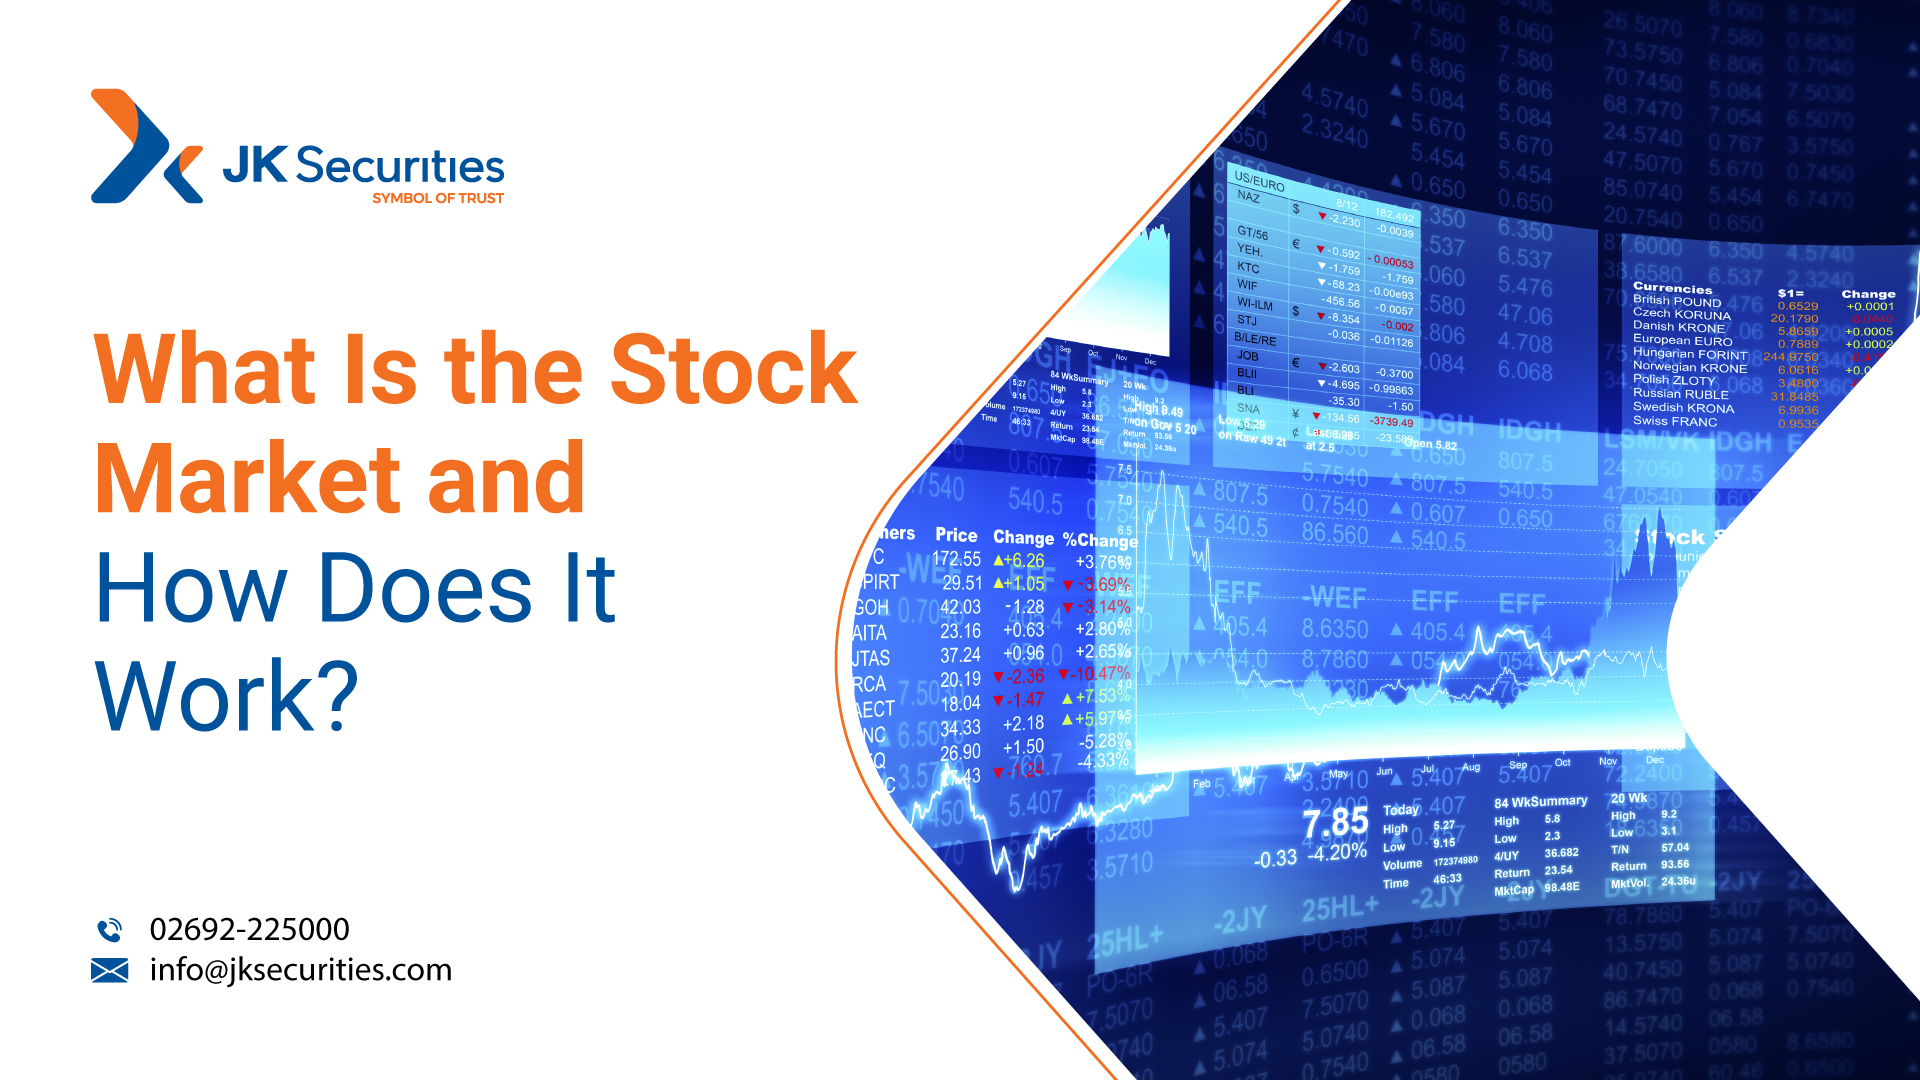 What Is the Stock Market and How Does It Work? - JK Securities